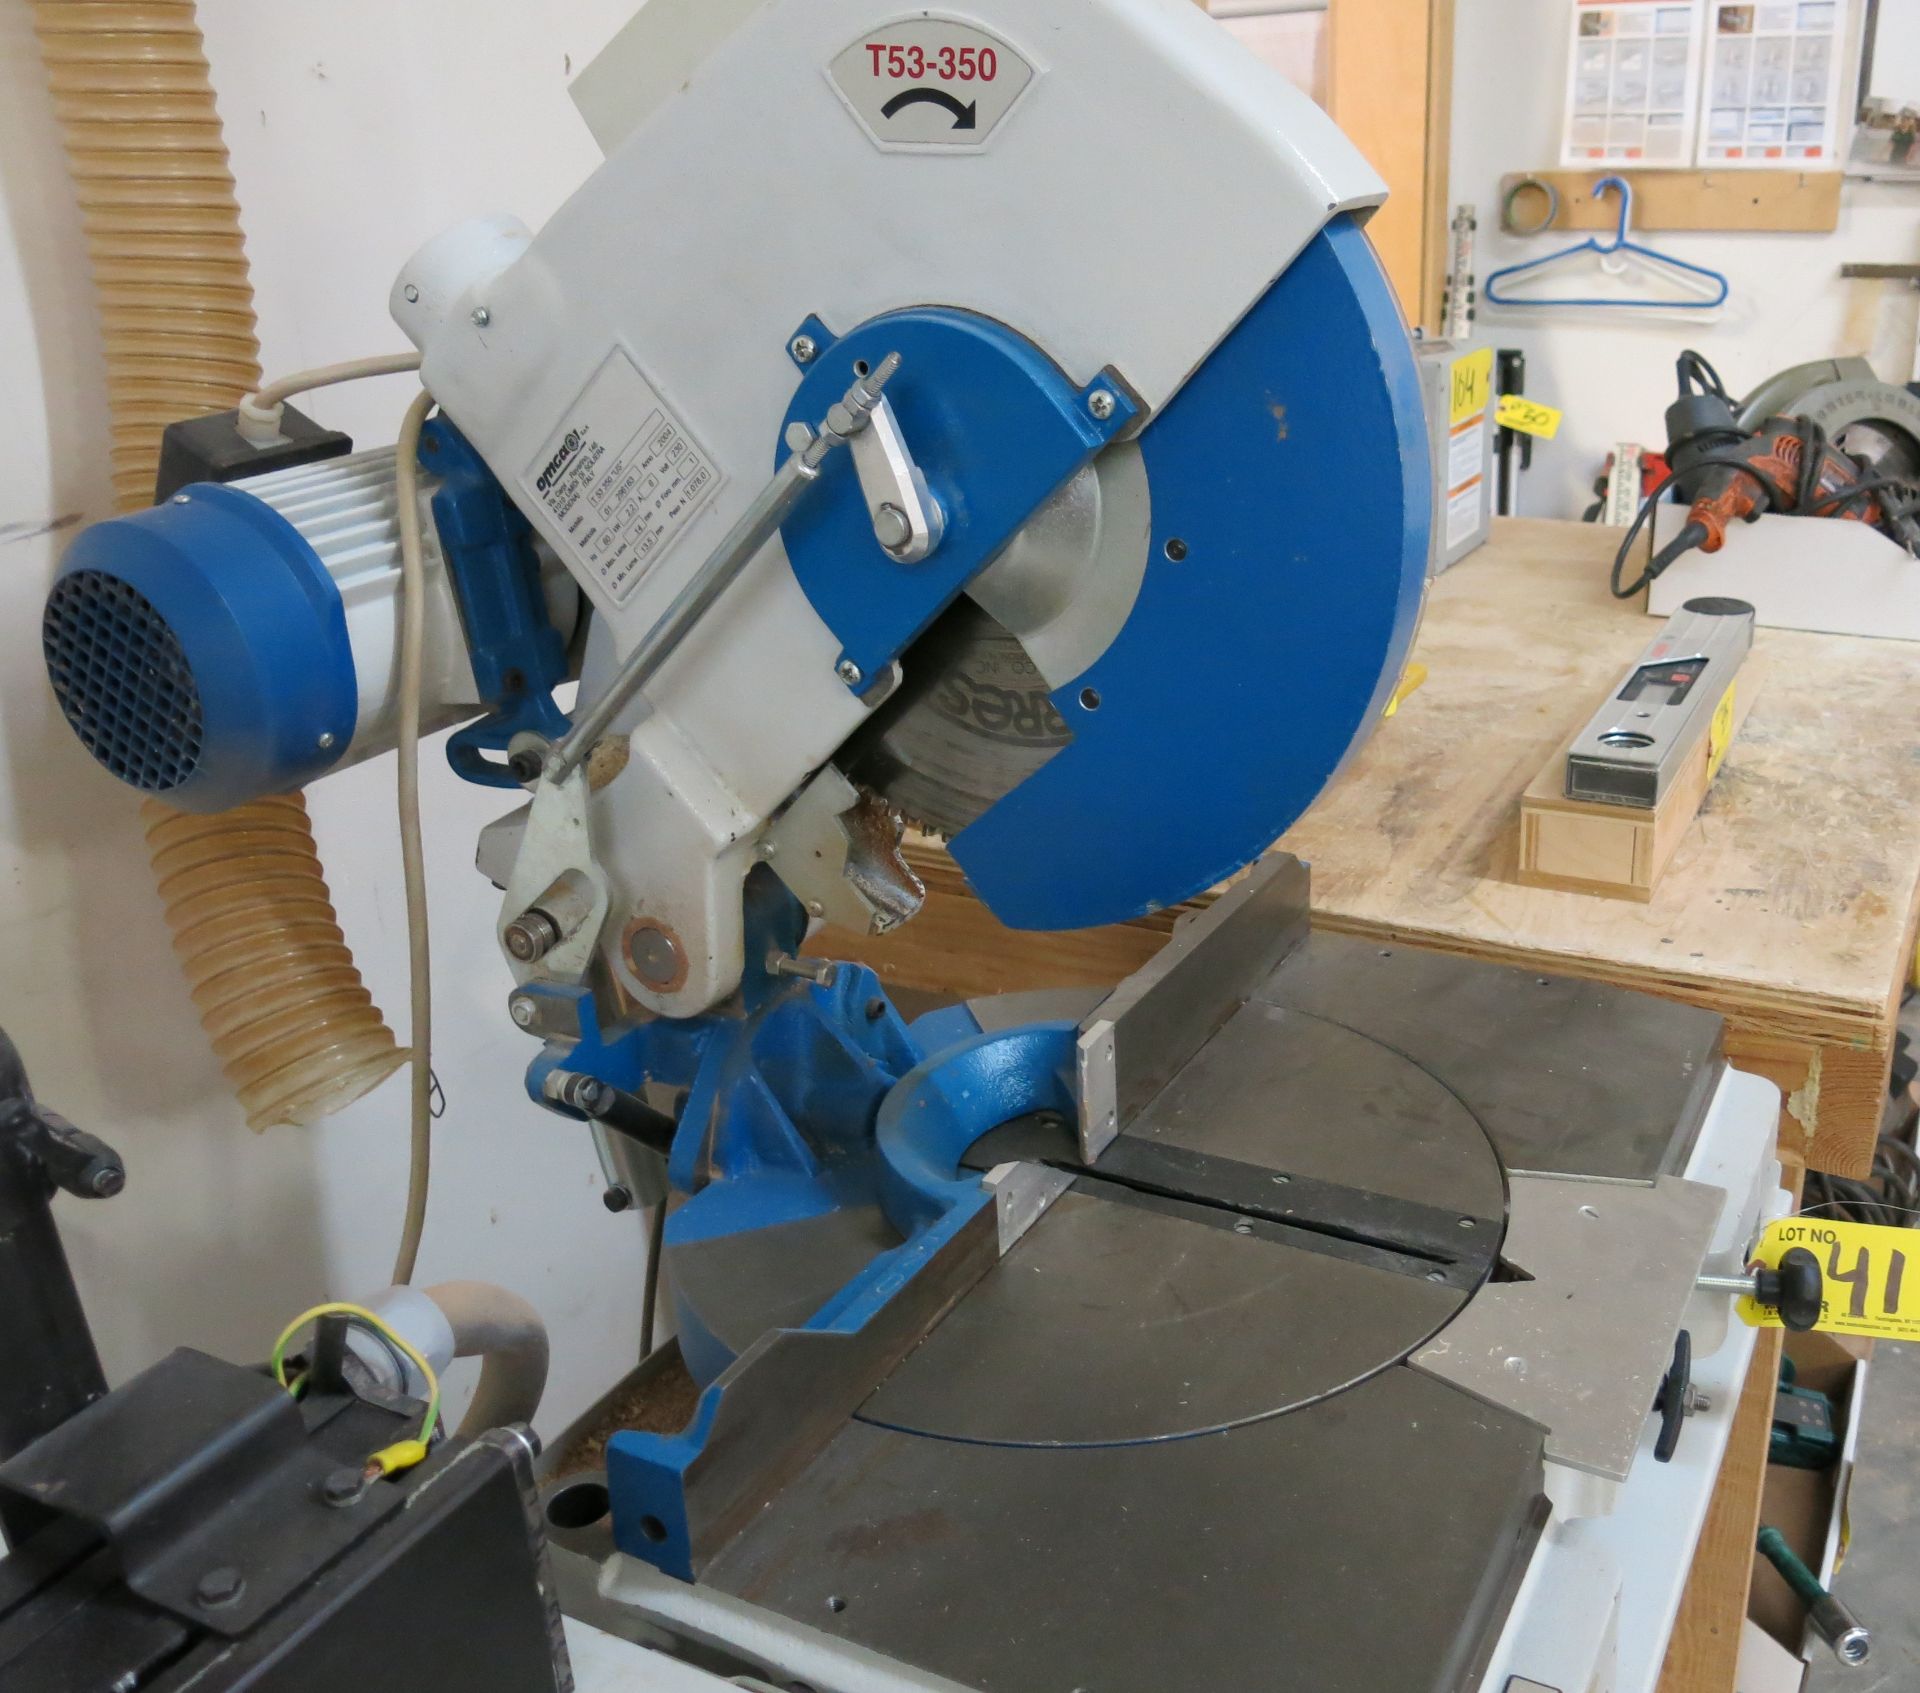 (1) OMGA MDL. T53 350 12" MITER SAW, WITH OMGA MDL. EP4000SX 15 FT. FINE POSITIONING SYSTEM WITH - Image 3 of 7